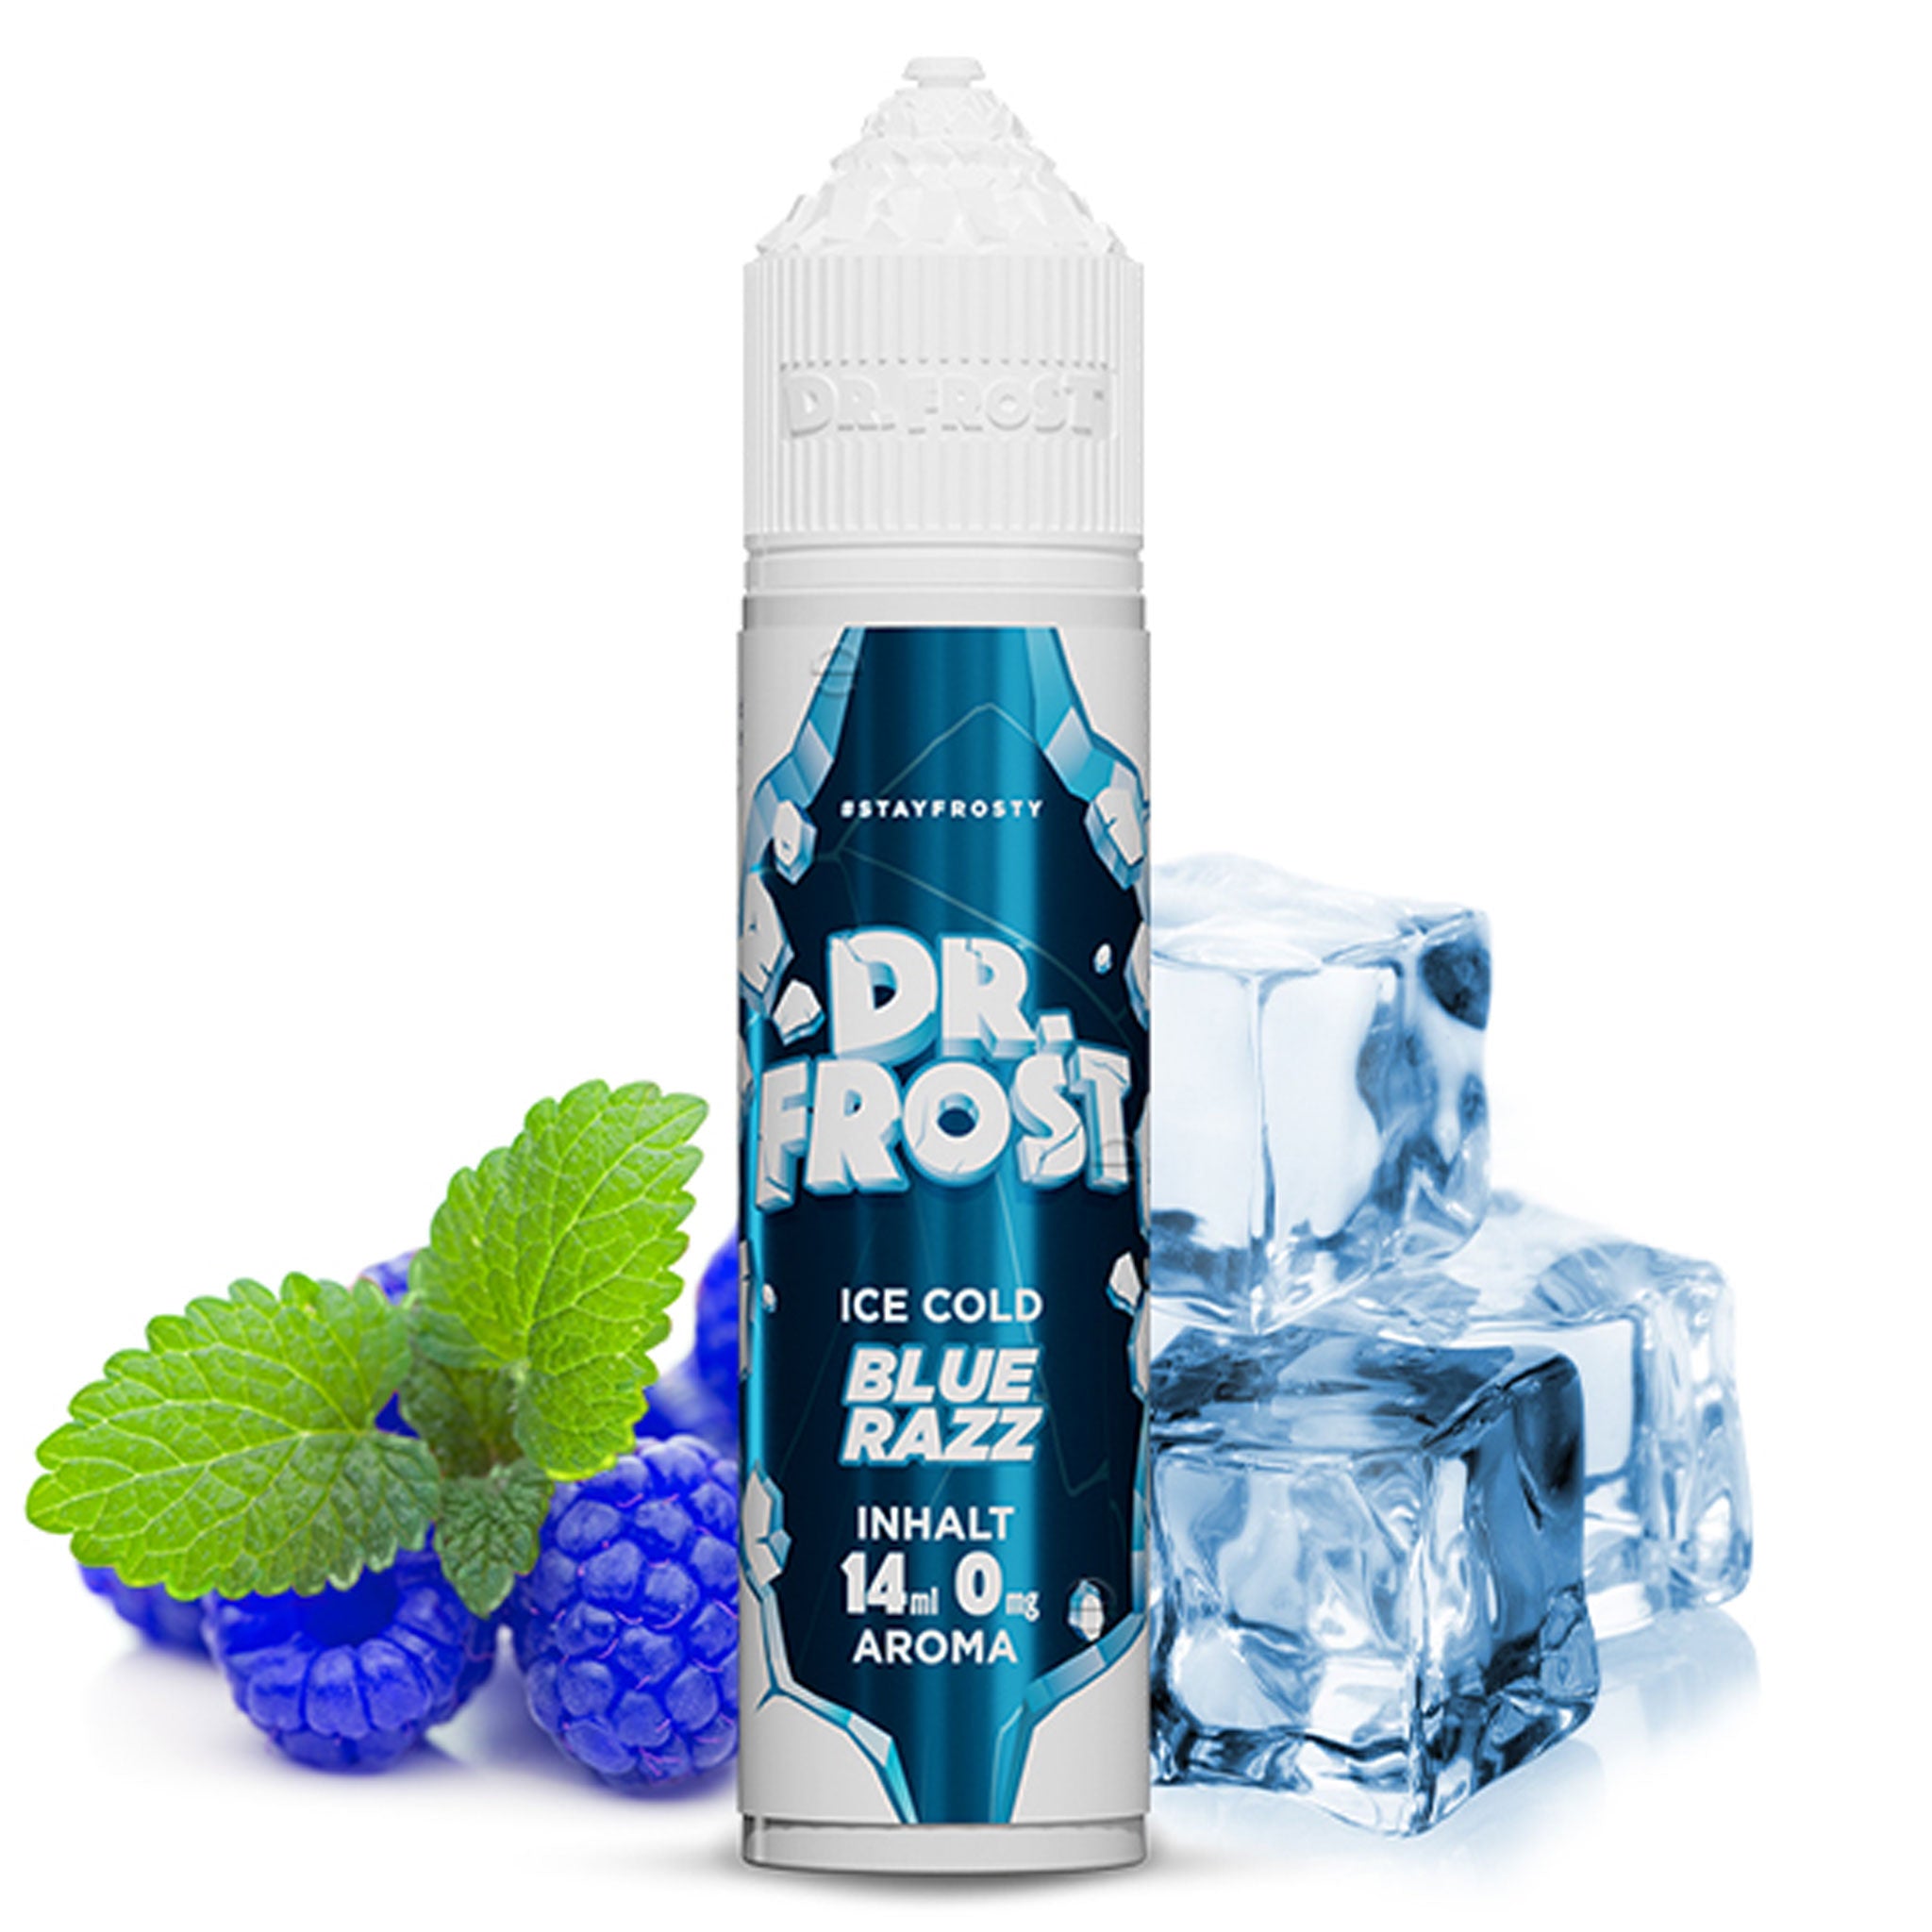 Dr. Frost - Ice Cold - Blue Razz - Longfill Aroma 14 ml